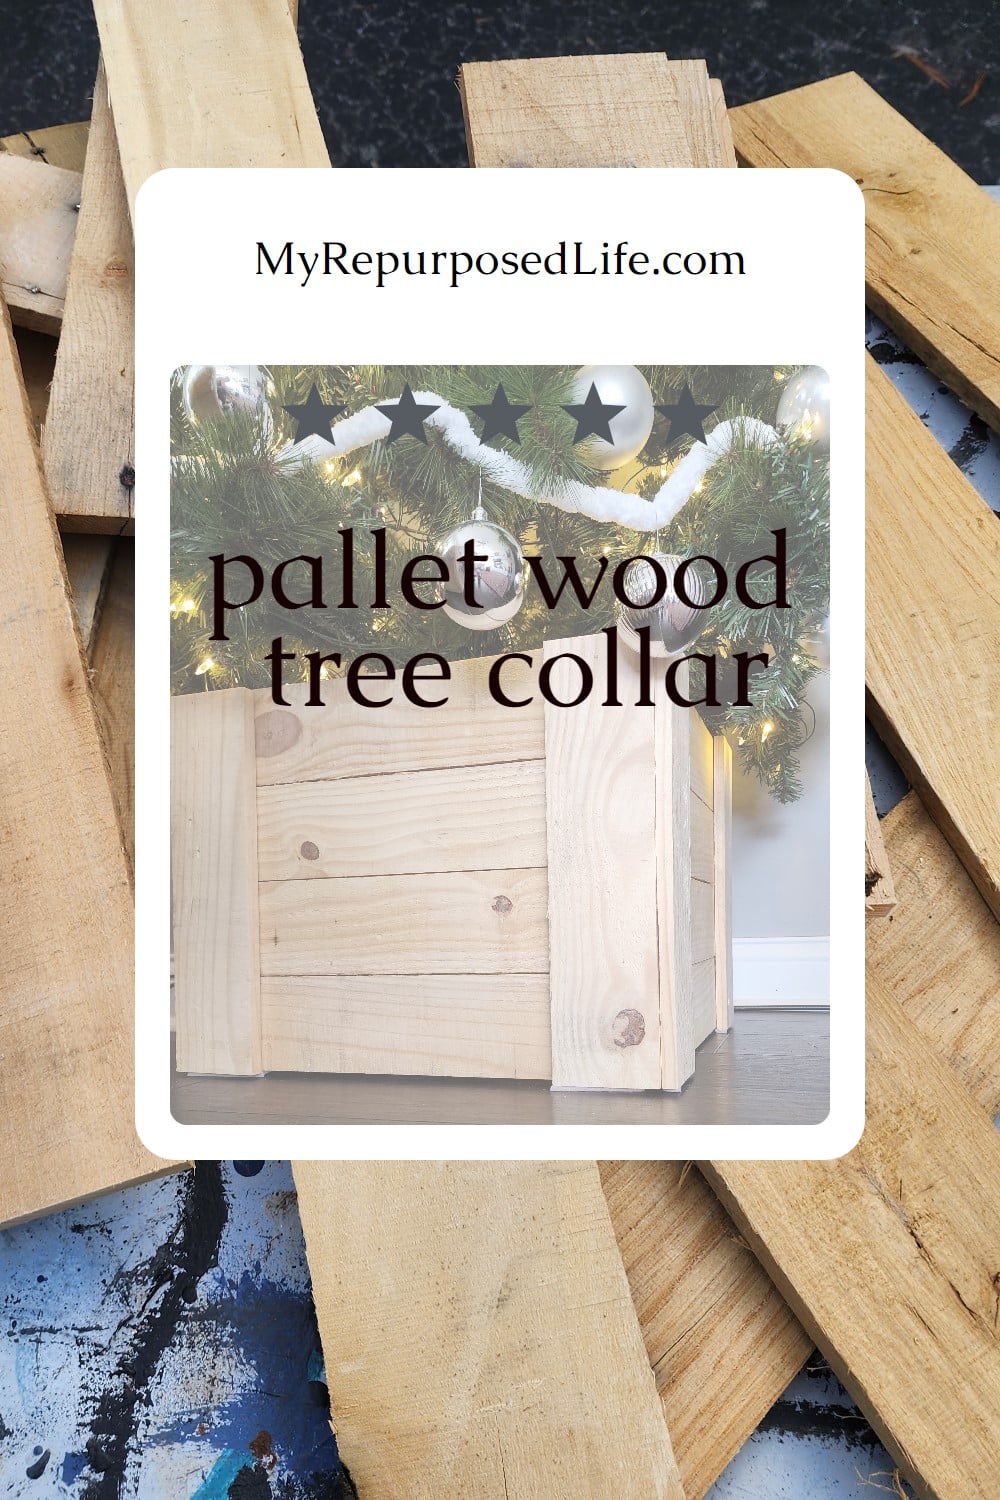 When you need a special sized tree collar, why not make your own pallet wood tree collar? This design is so simple to make, and it's virtually FREE if you use pallet or reclaimed wood. Directions and tips included in this article. #MyRepurposedLife #Christmas #pallet #treecollar via @repurposedlife